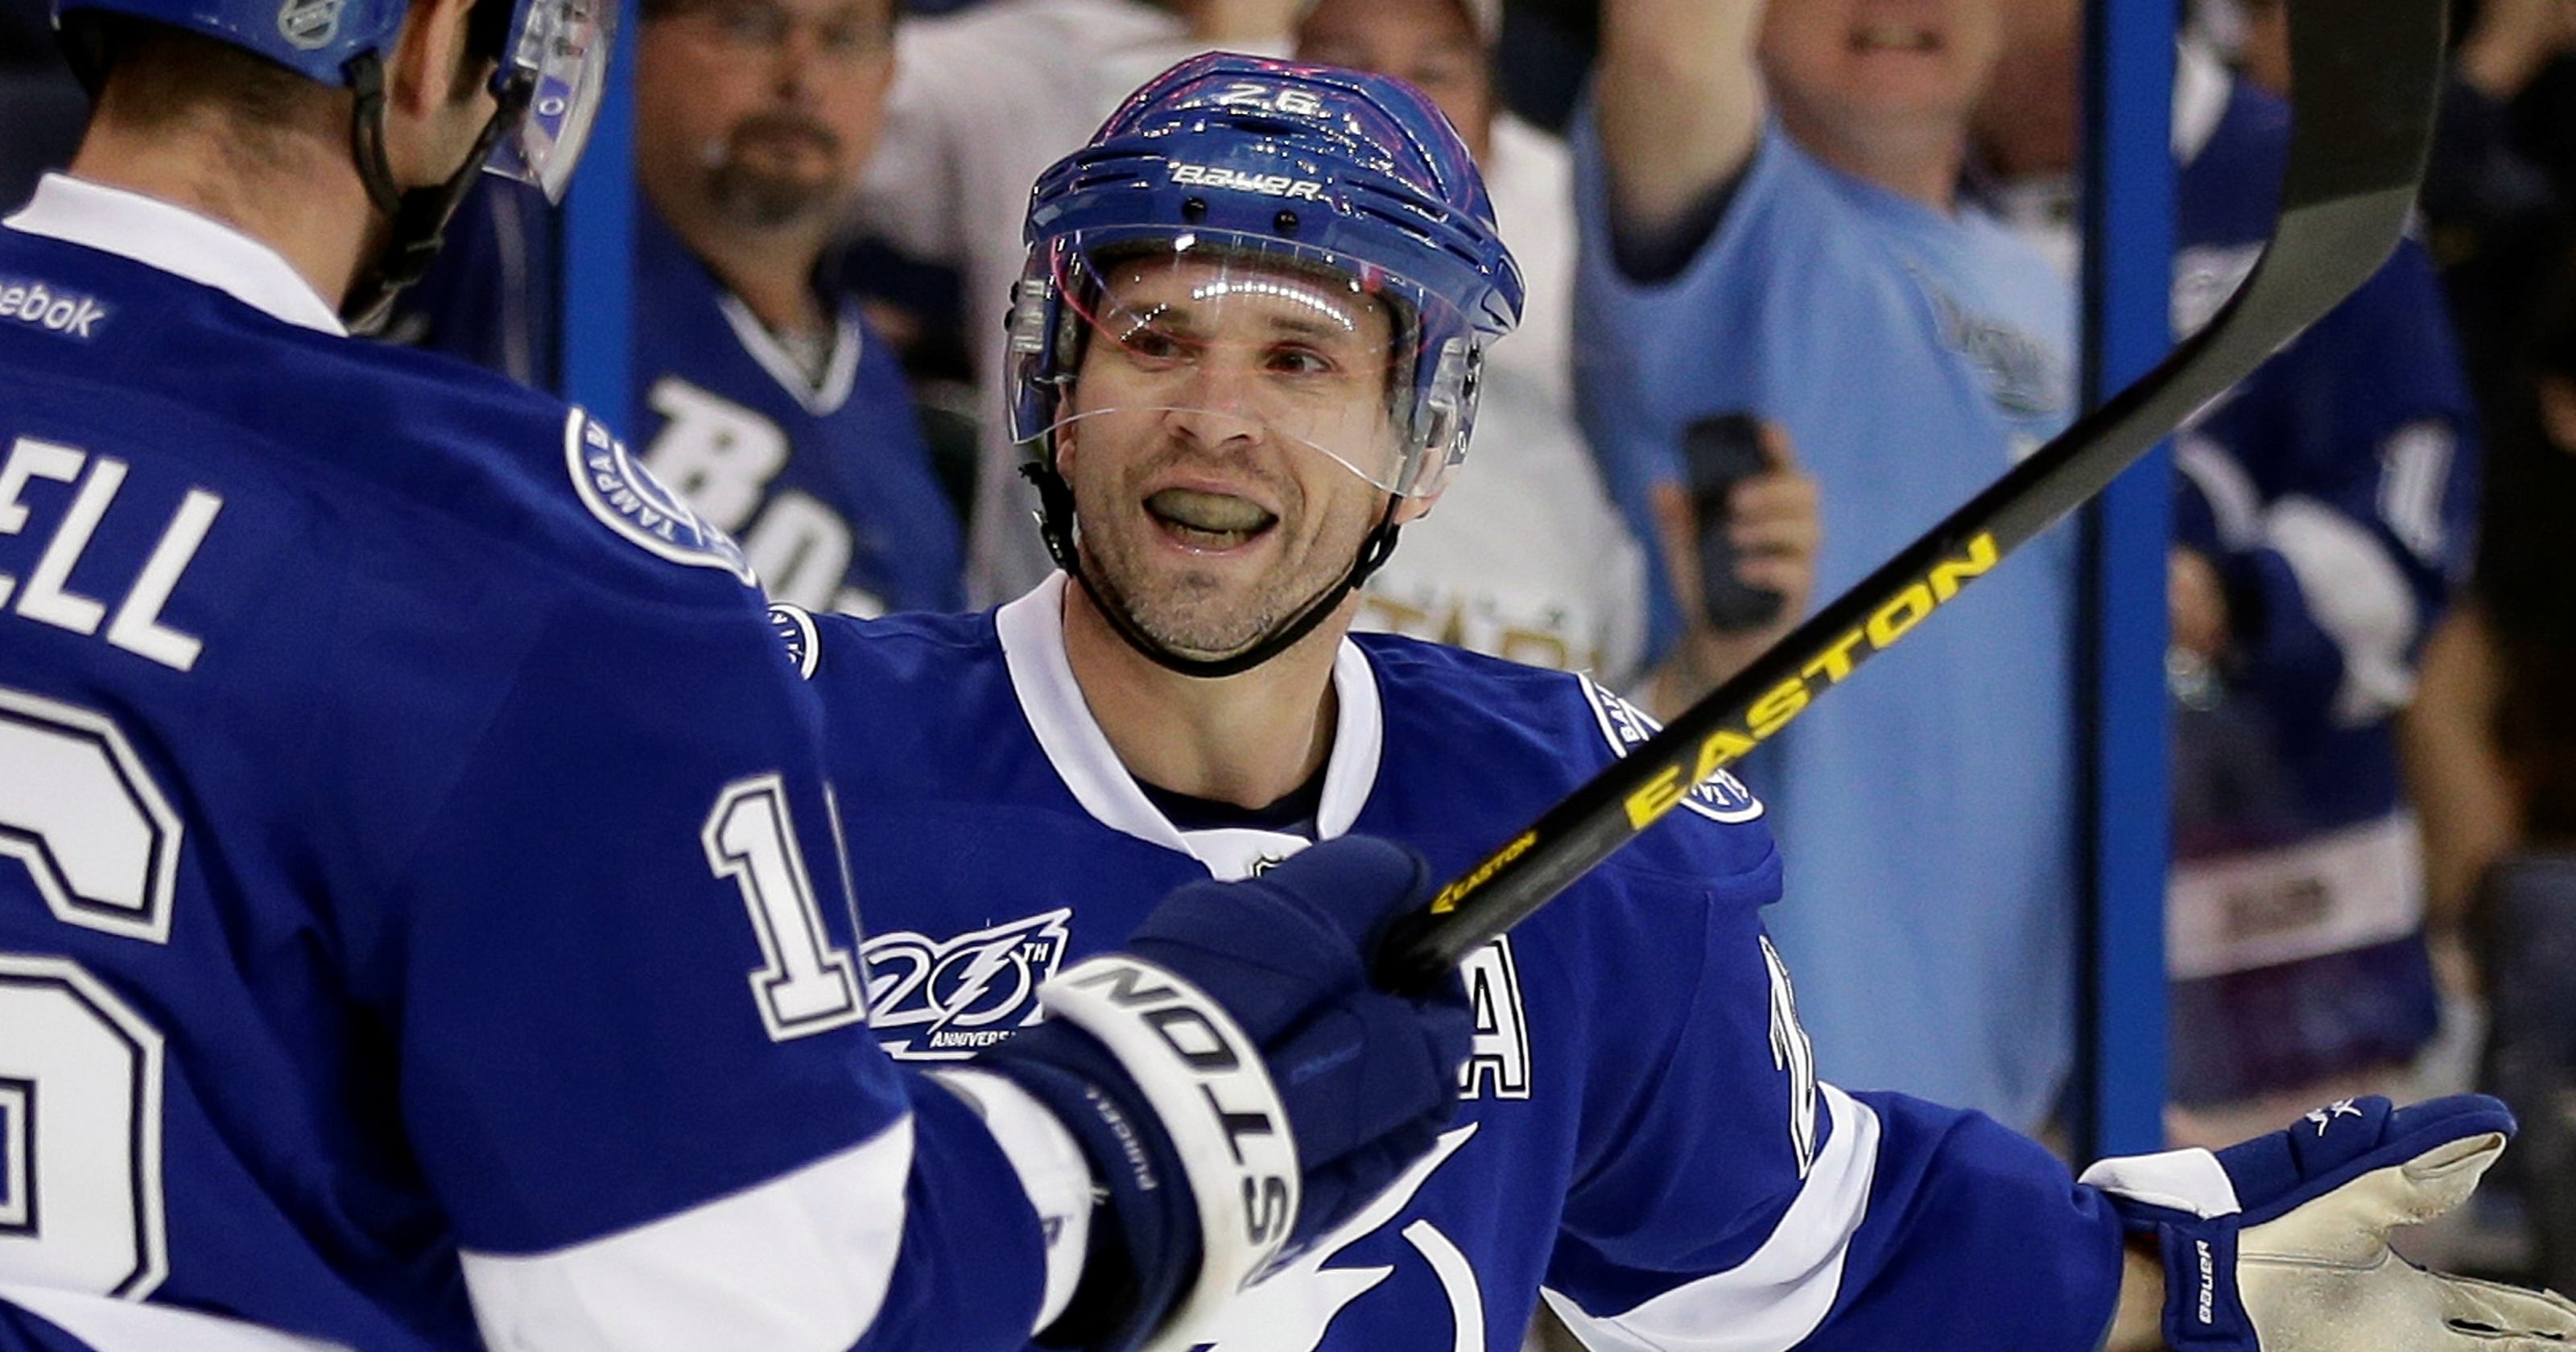 Martin St. Louis becomes oldest player to win NHL scoring title